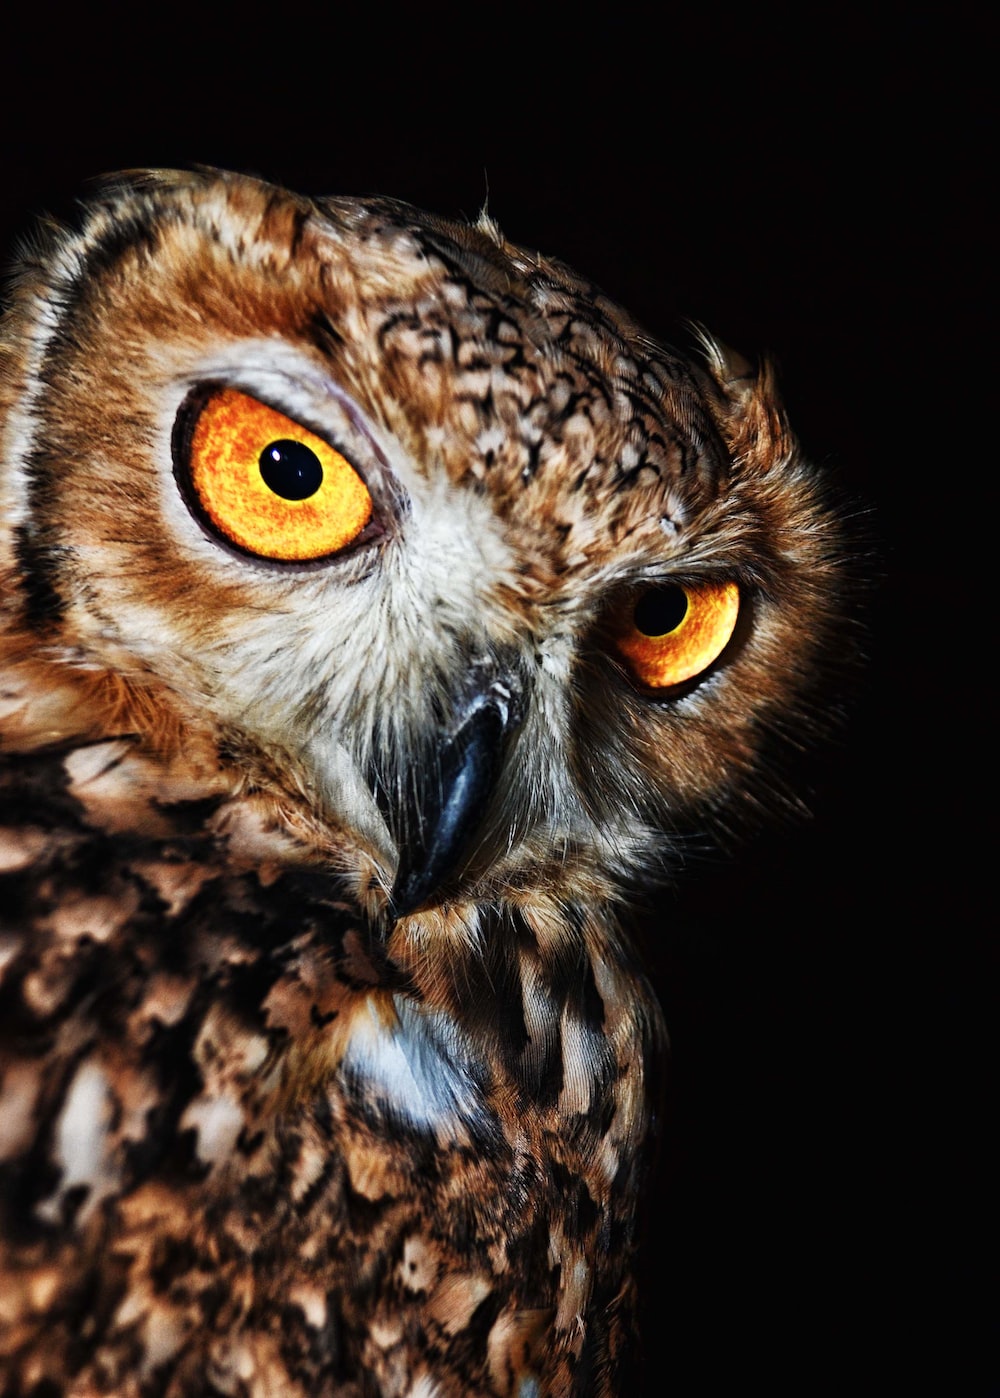 Owl Eyes Picture. Download Free Image